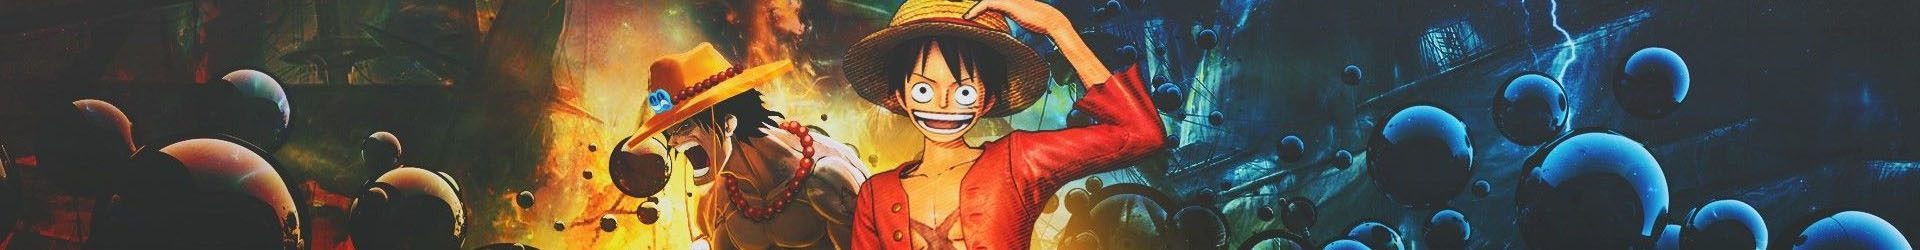 One Piece Chapter 994